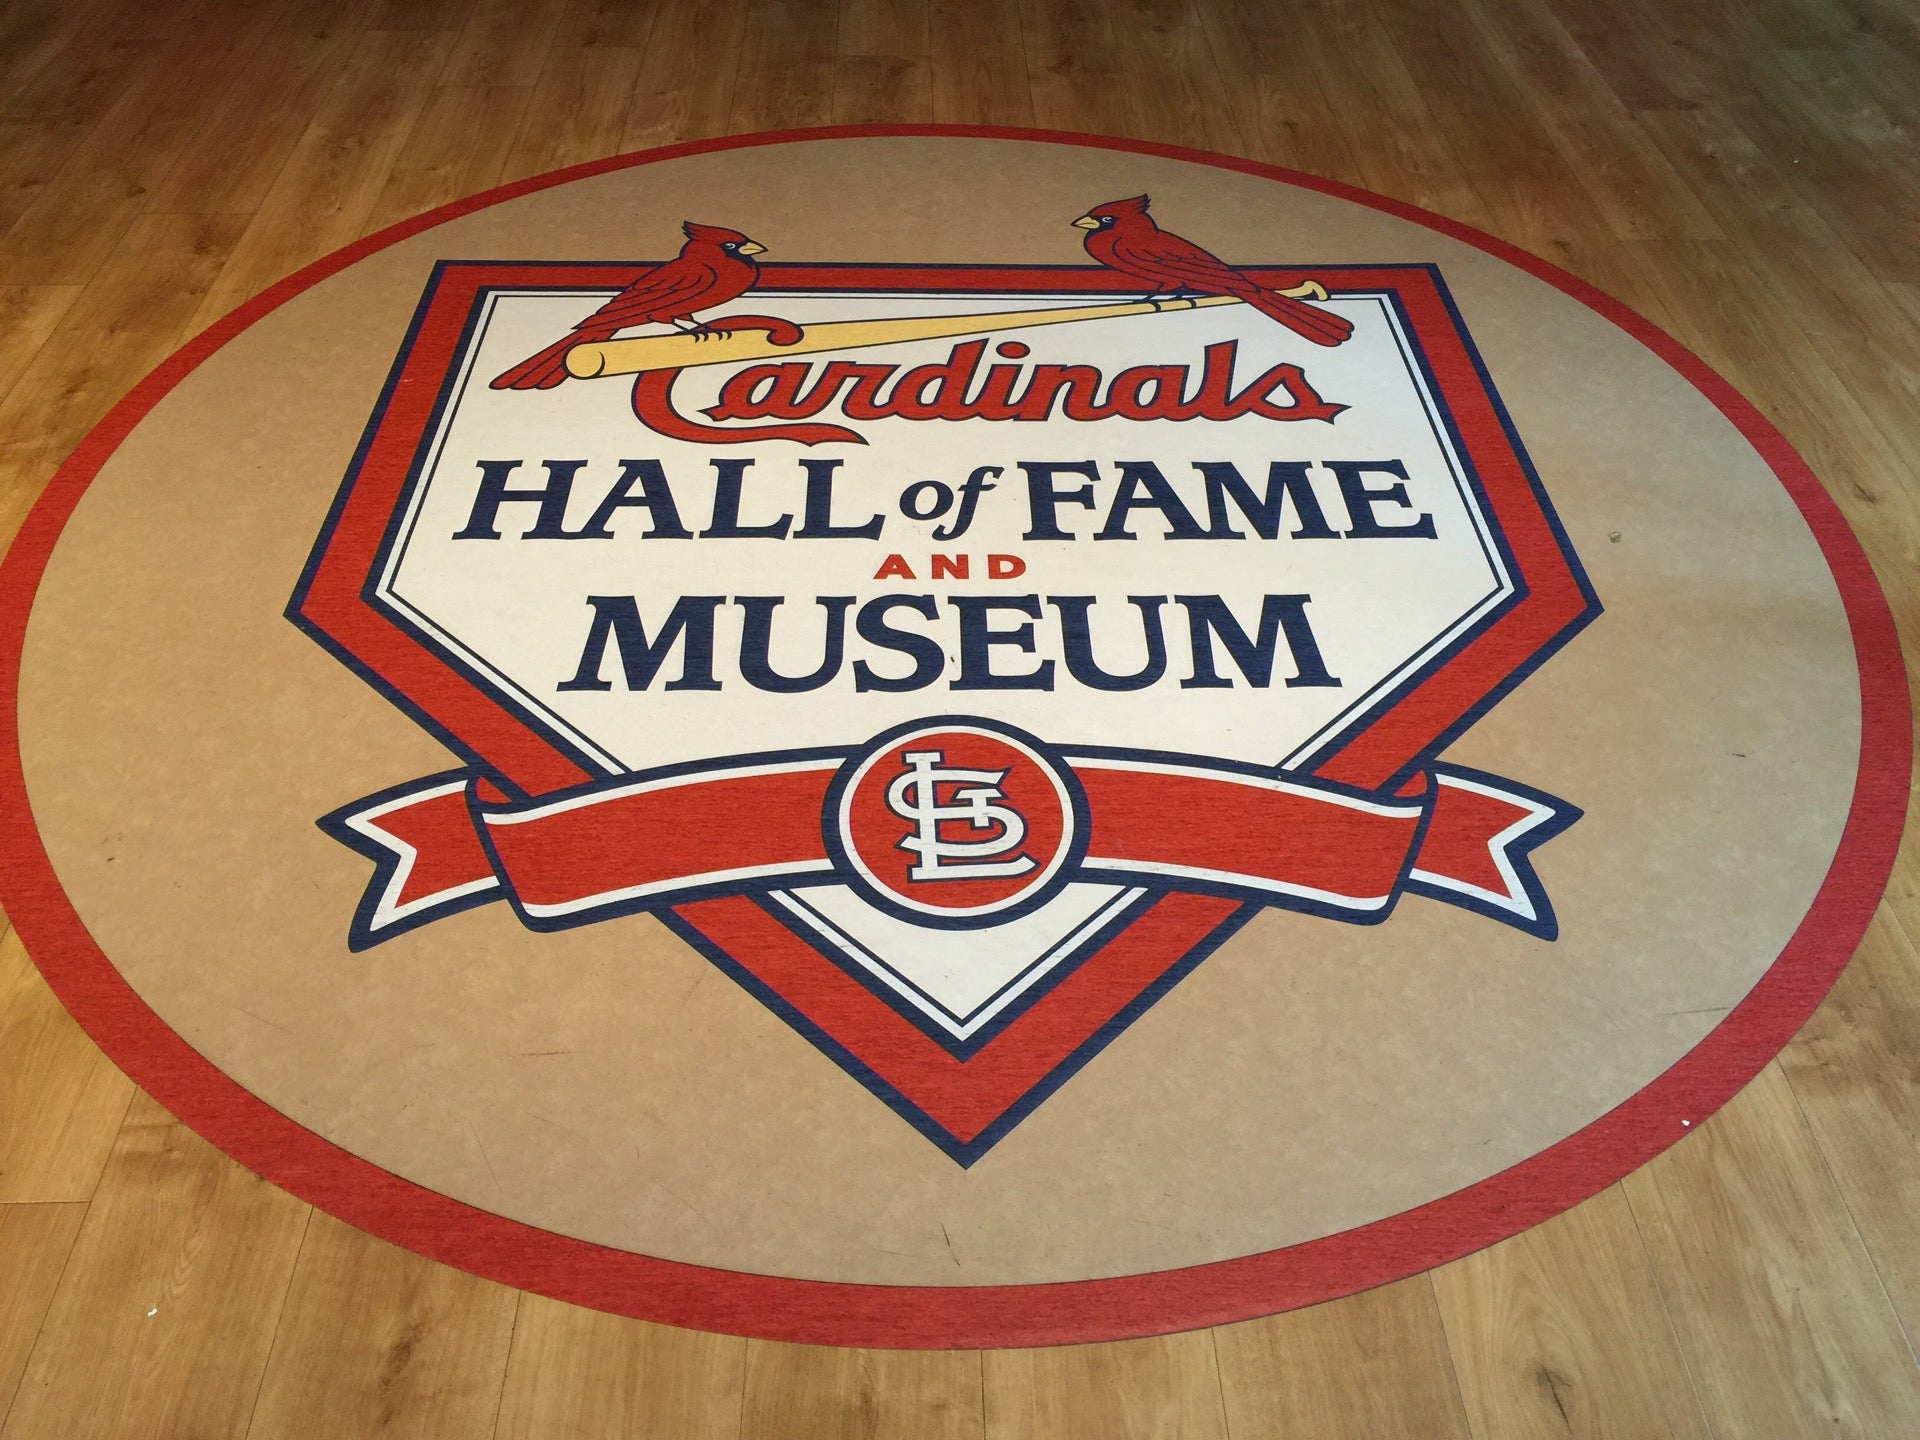 St. Louis Cardinals Hall of Fame and Museum - PGAV